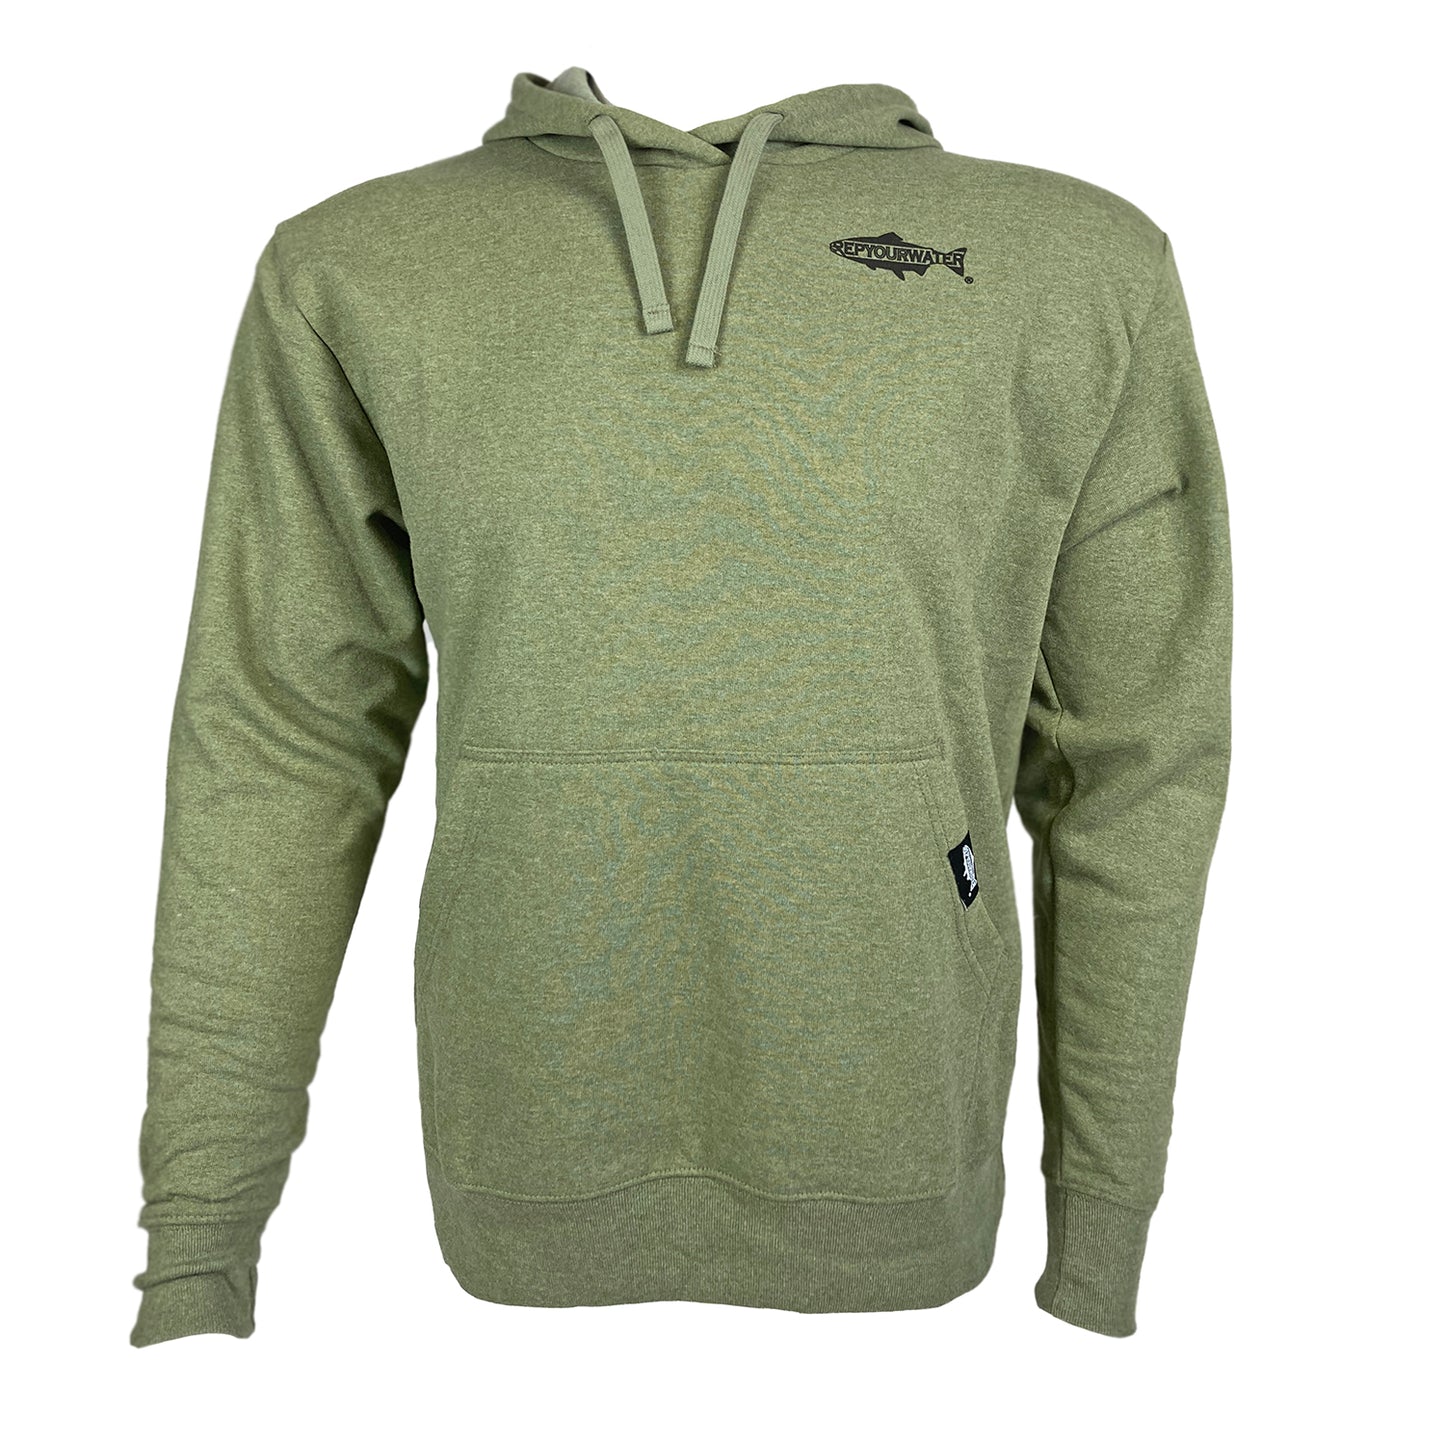 Green hoody shown from the front with Rep Your Water logo on wearer's left chest.